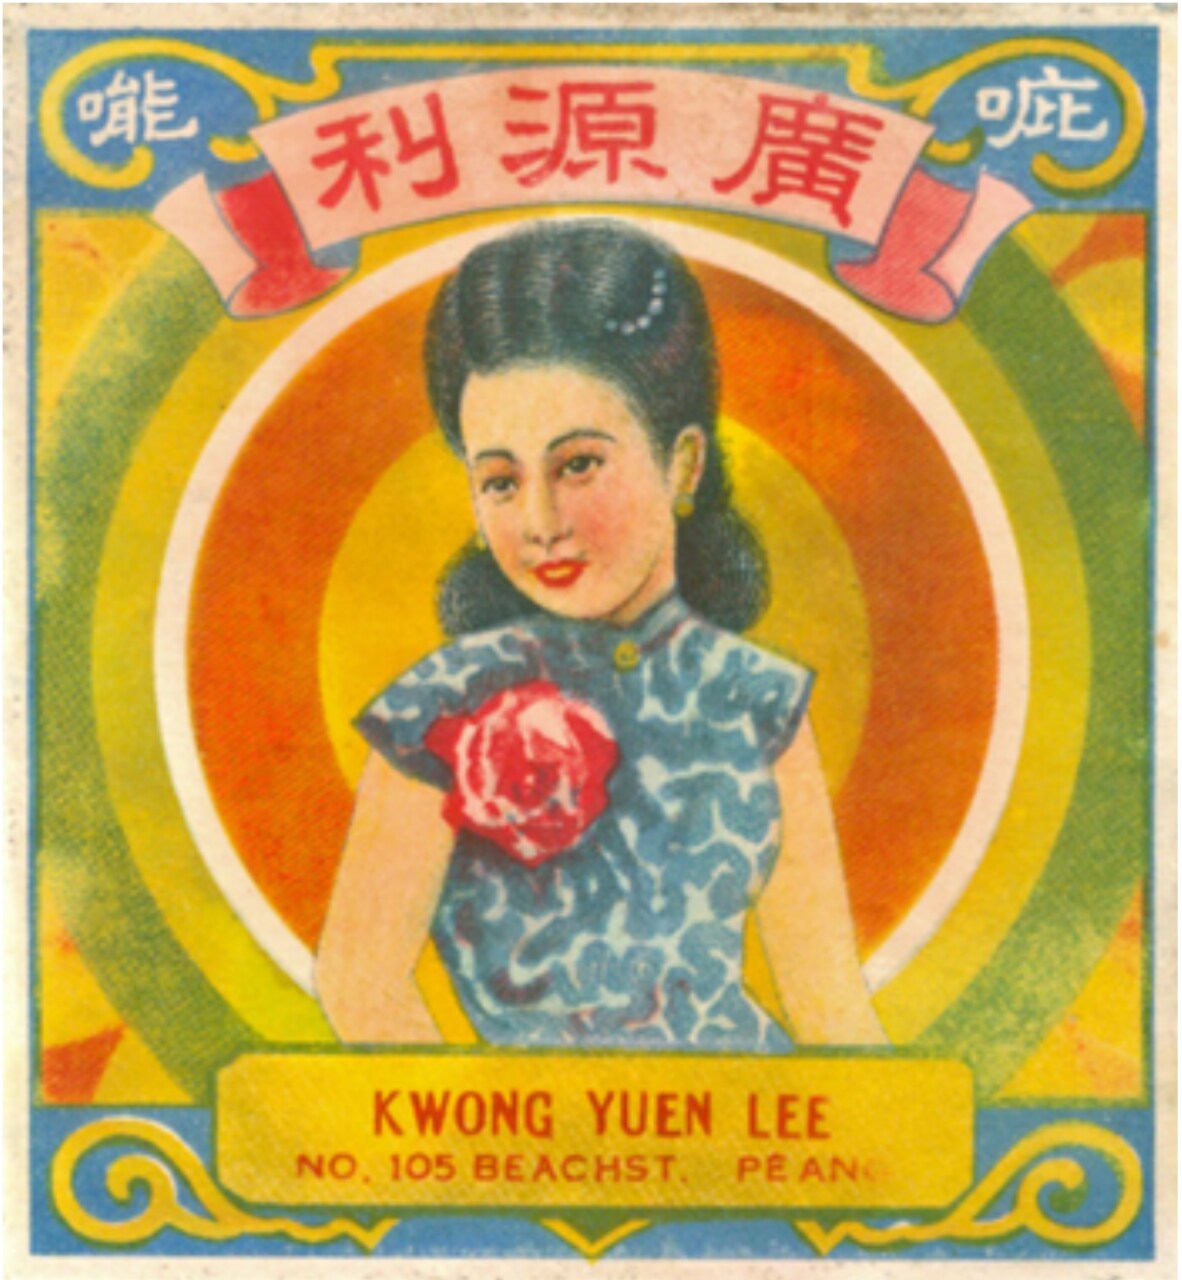 Photograph of colourful Malaysian advert featuring a woman in traditional dress